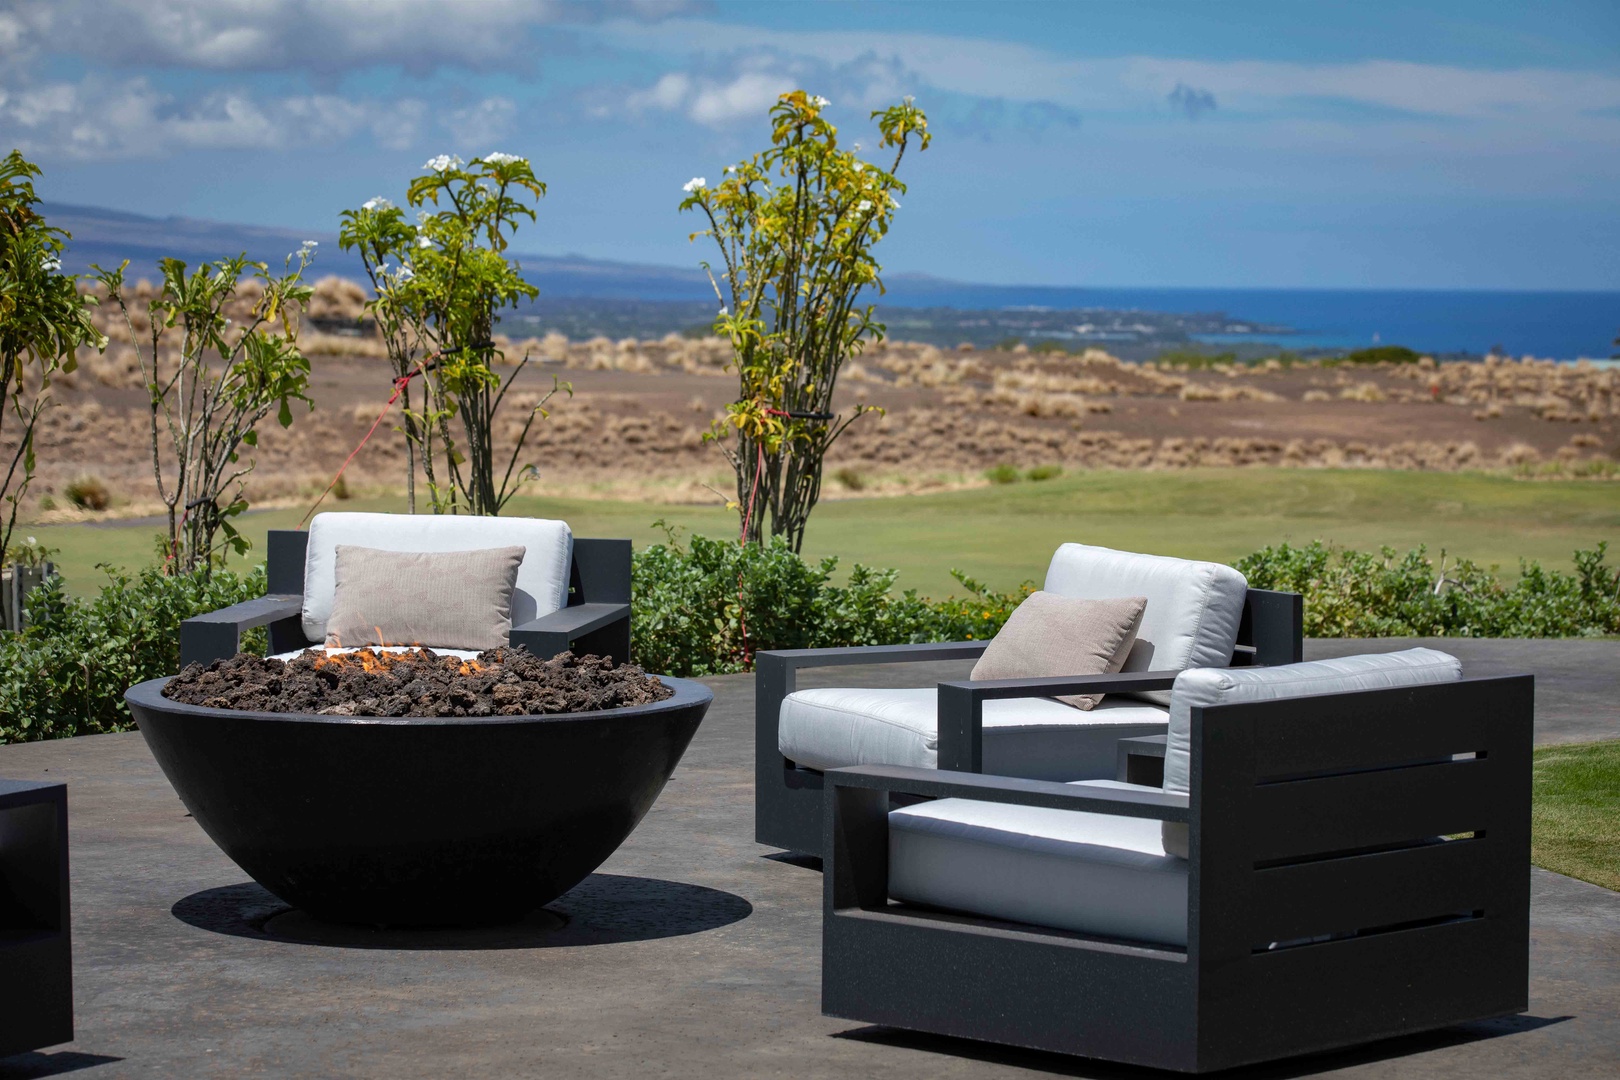 Kamuela Vacation Rentals, Hapuna Estates #8 - Enjoy time by the fire pit day or night